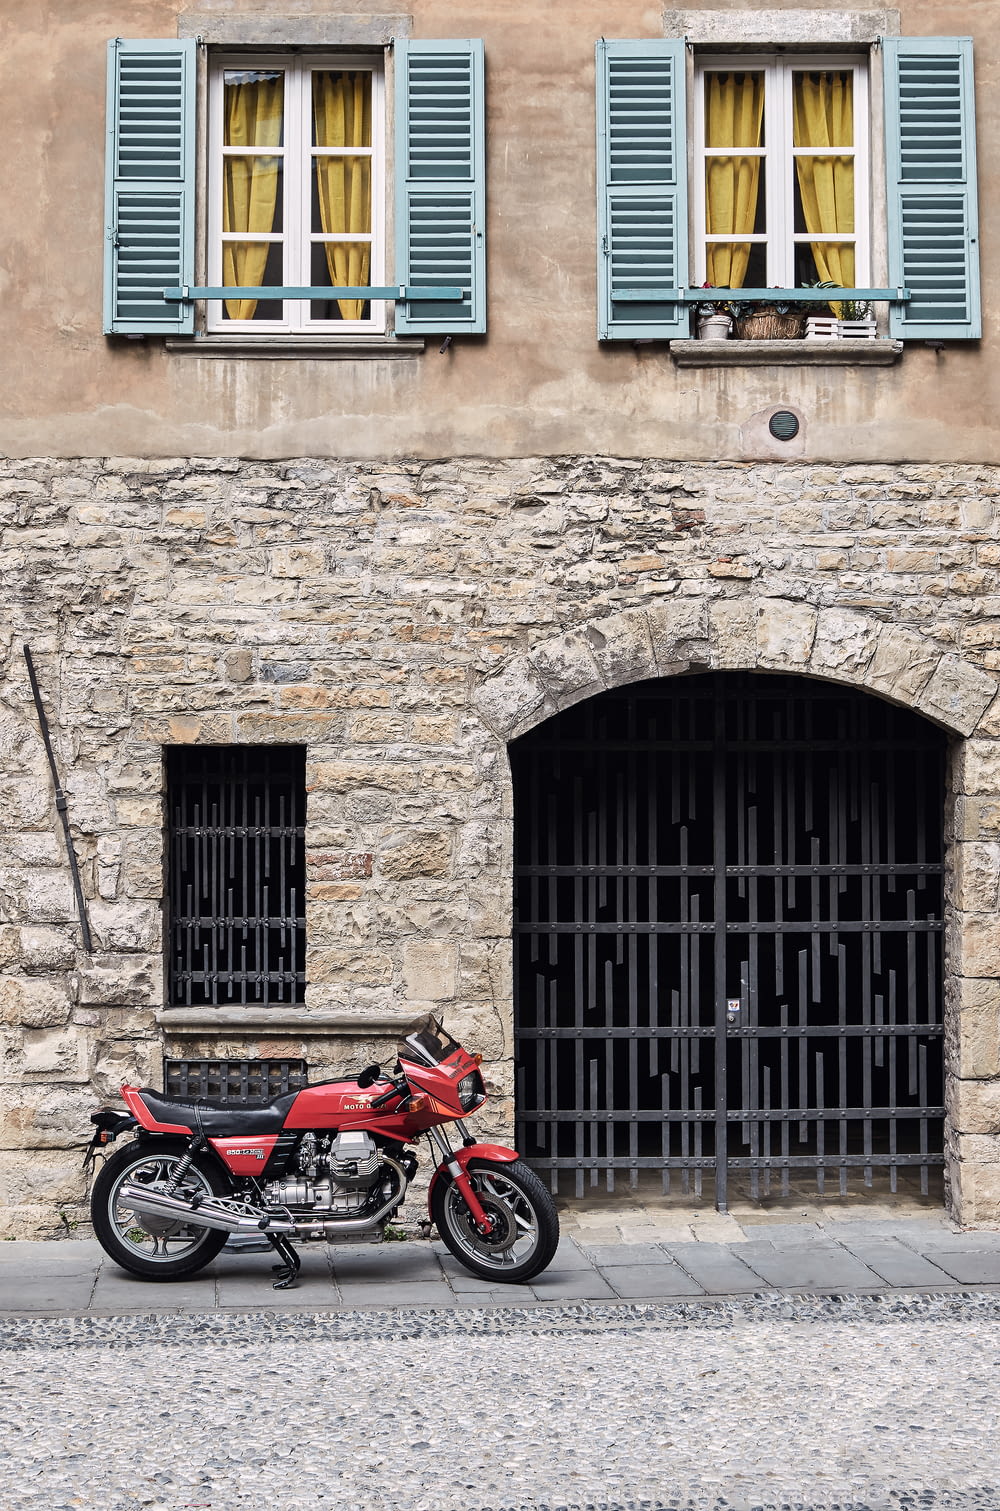 red and black motorcycle parked beside brown brick building